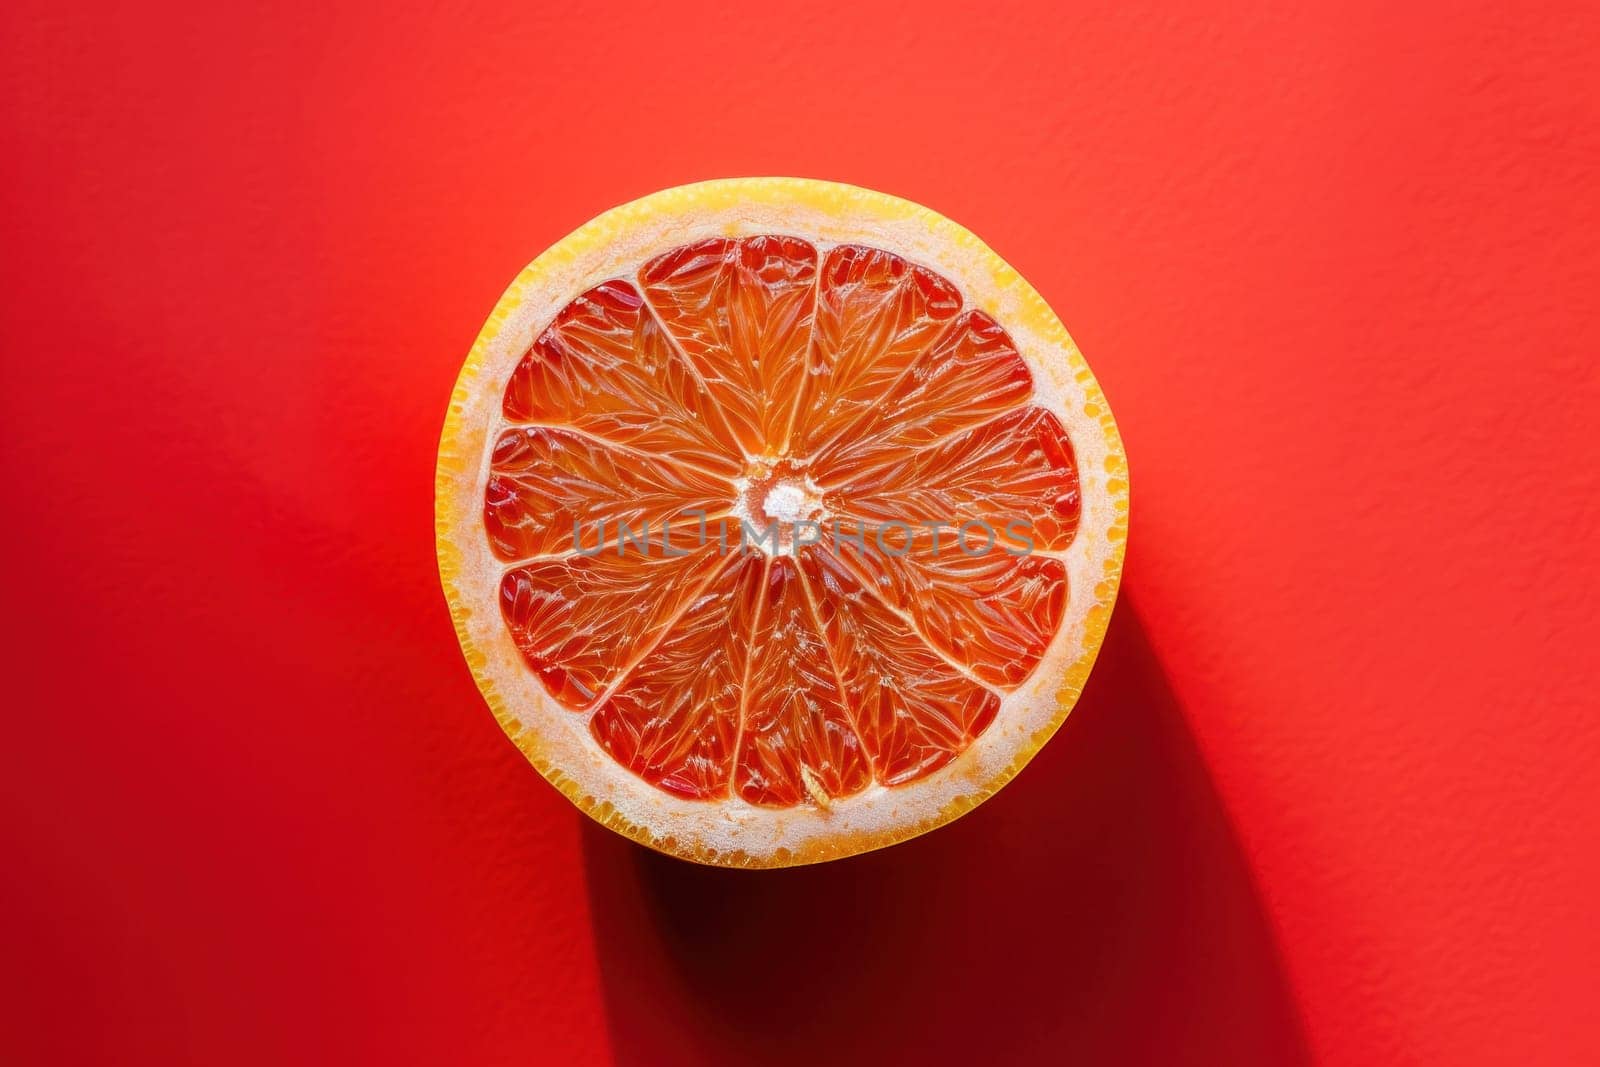 Orange halves on vibrant red background with space for text, fresh and juicy fruit concept